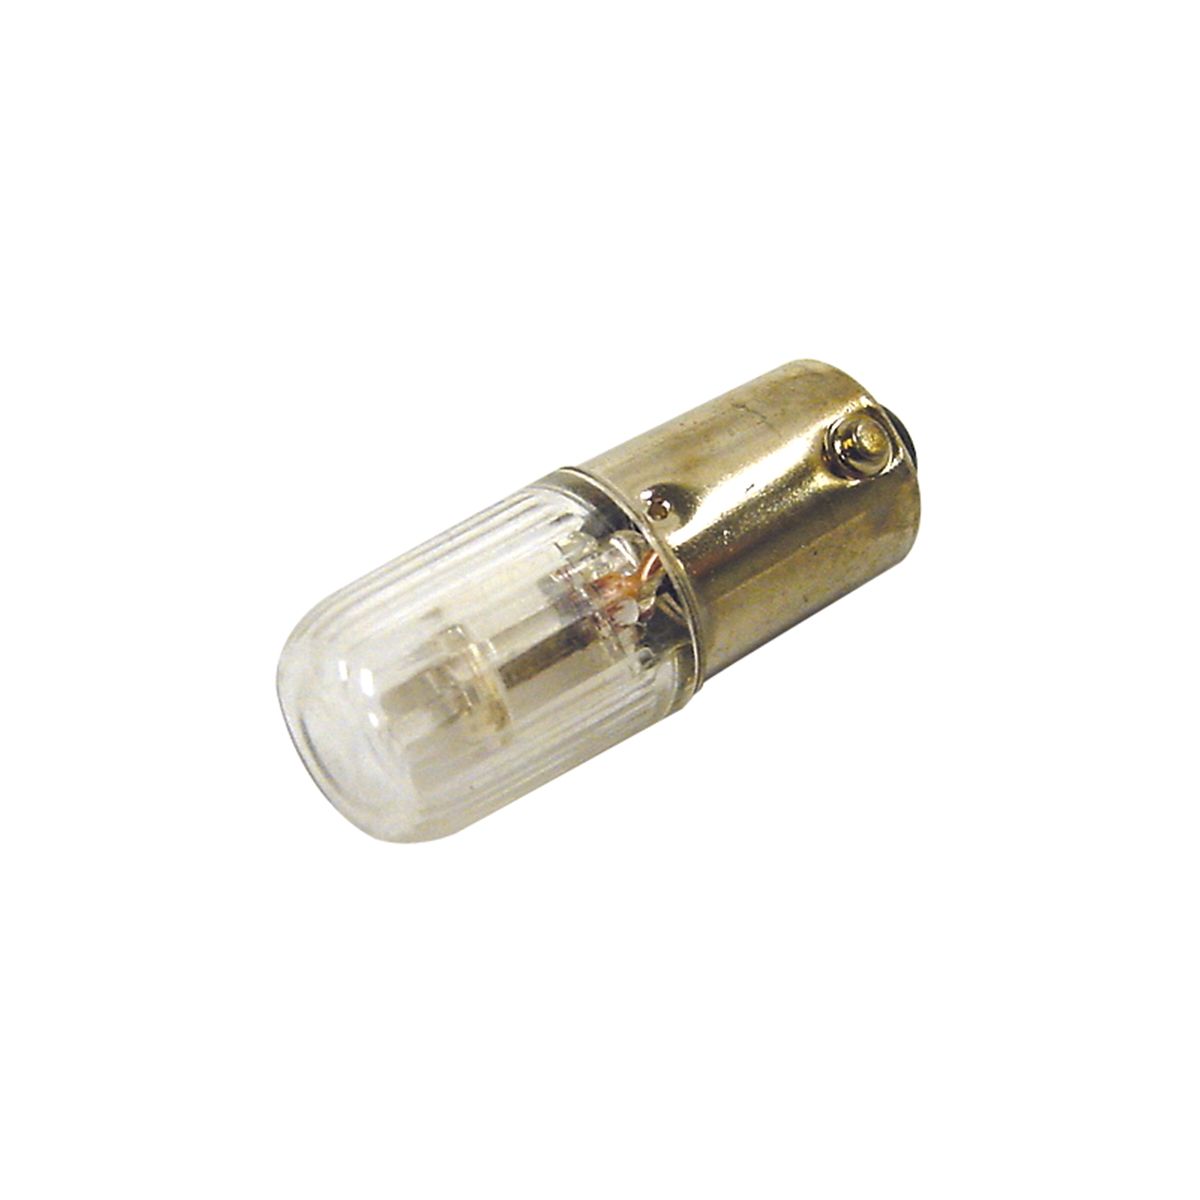 Replacement Bulb For Model 23900 Spark Checker...